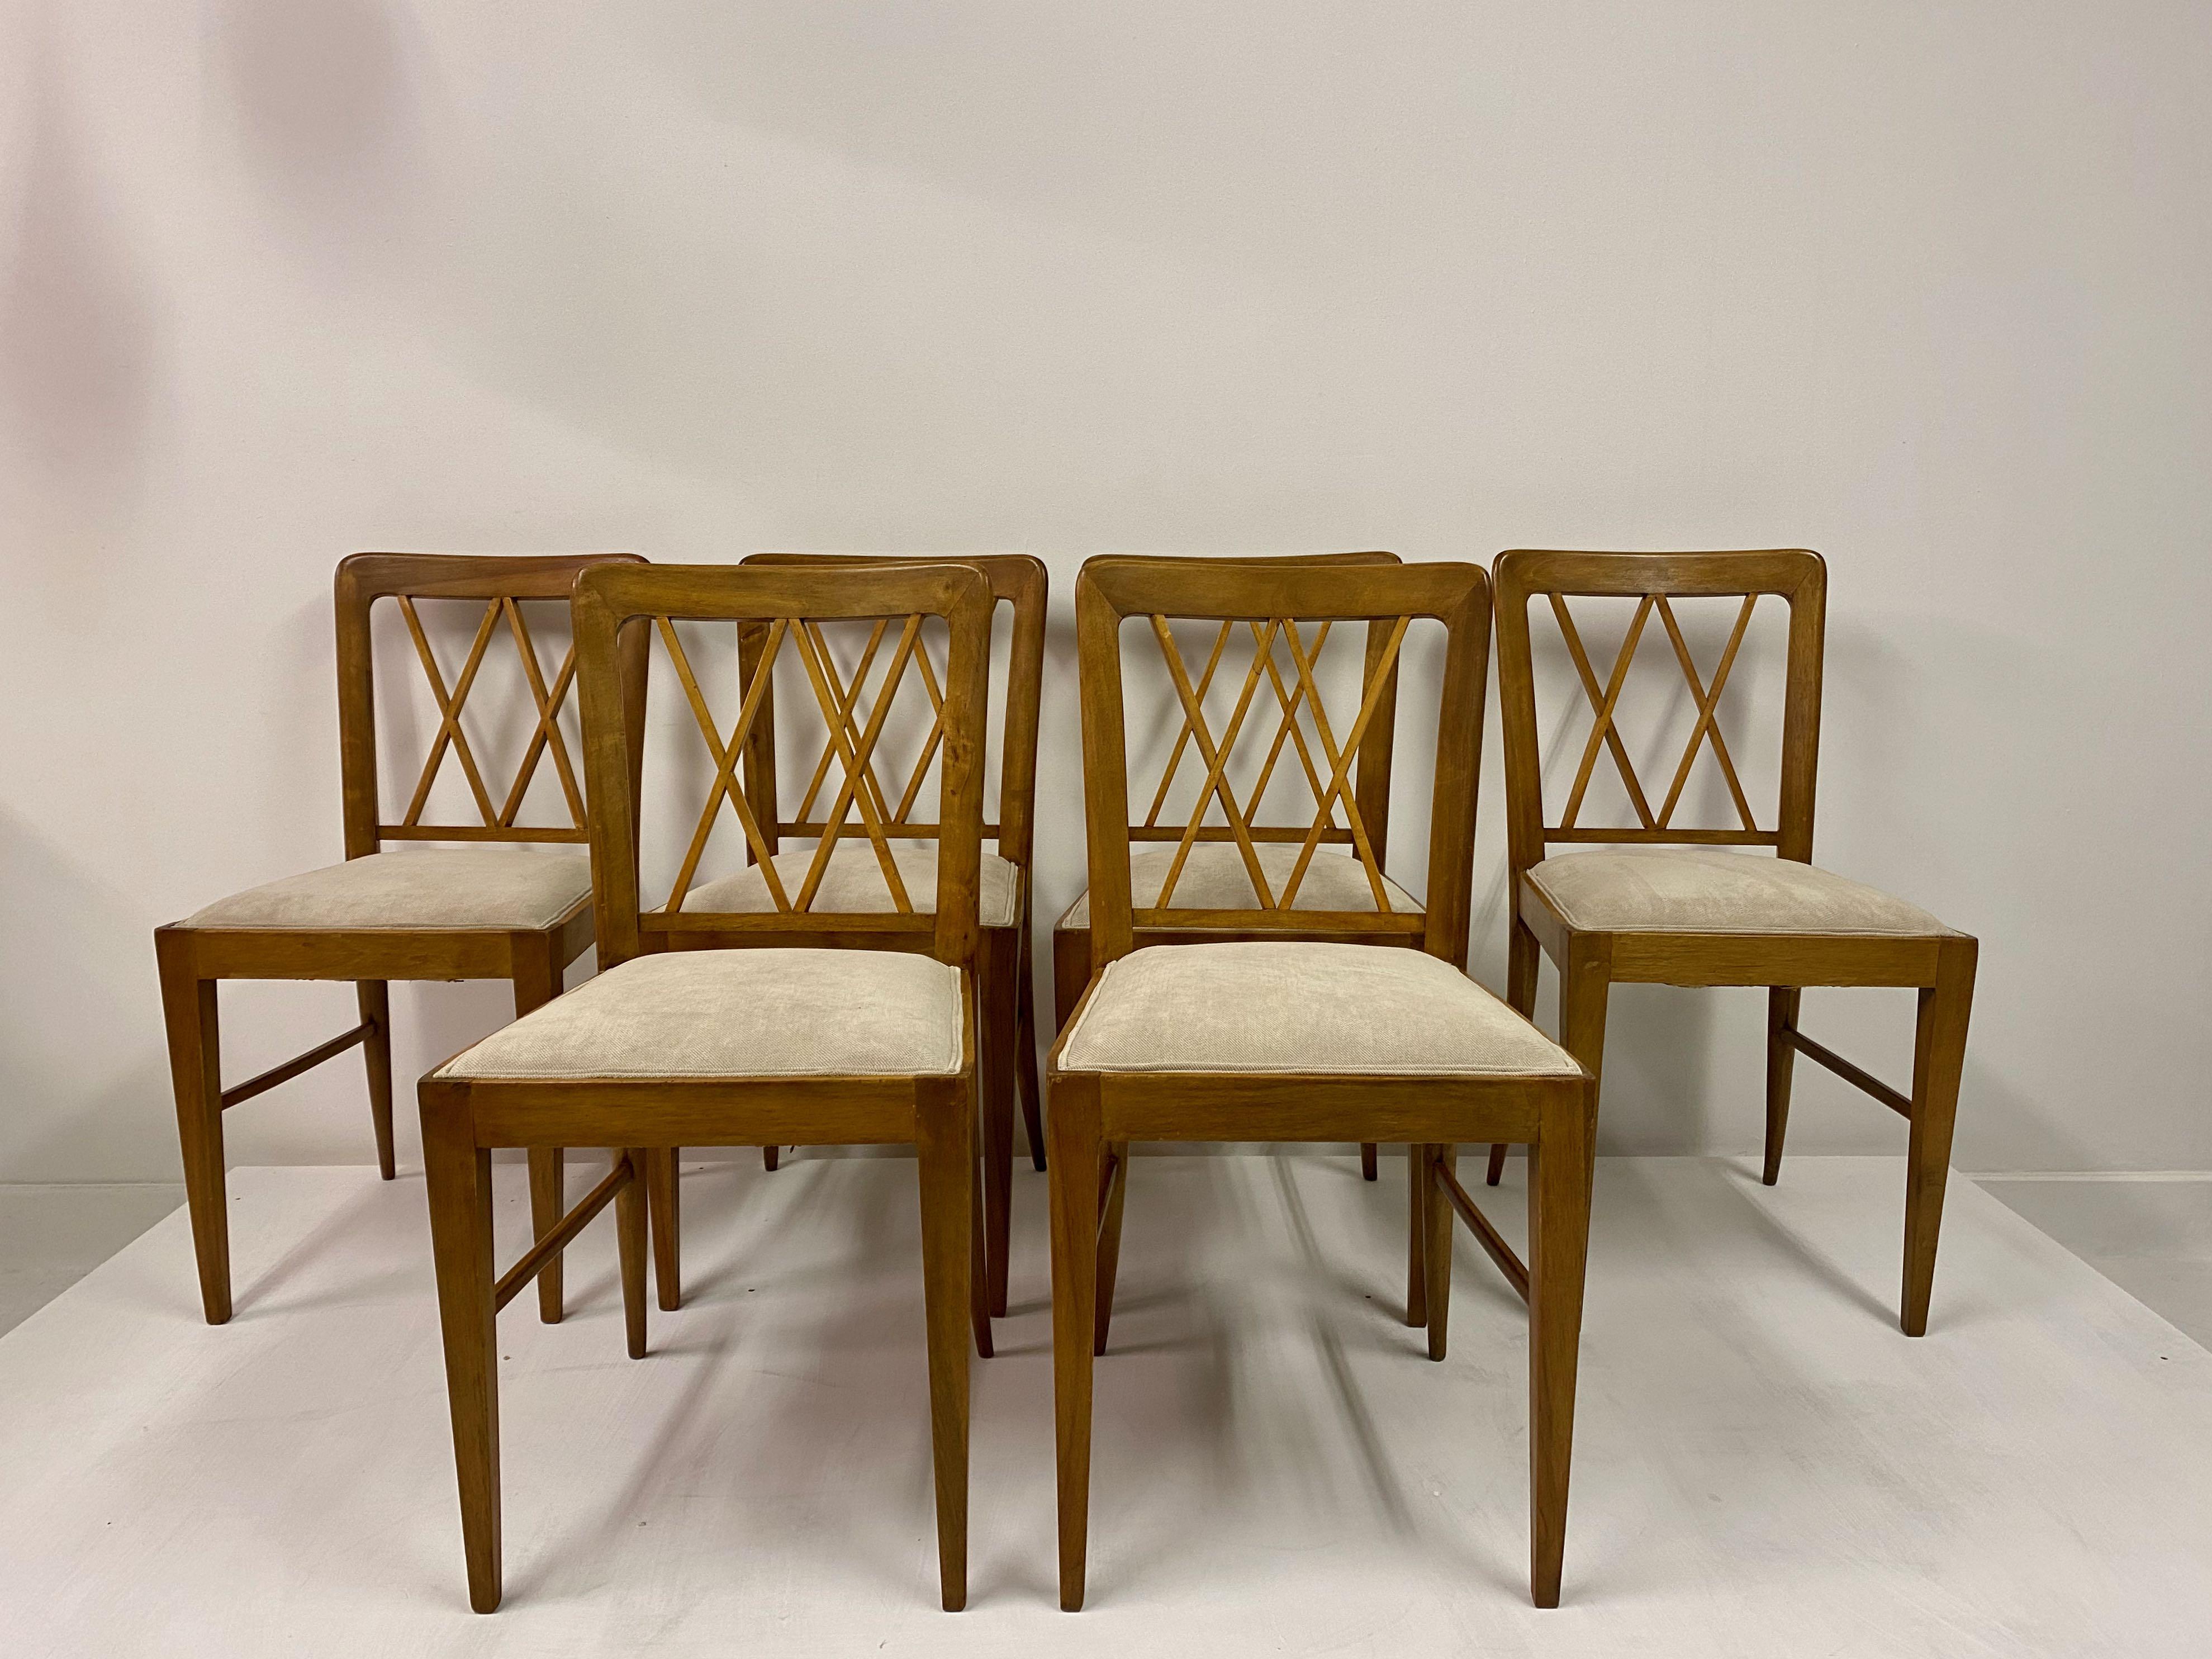 Set of six chairs

Attributed to Paolo Buffa

Beech frame

Measure: Seat height 49cm

1940s Italian.